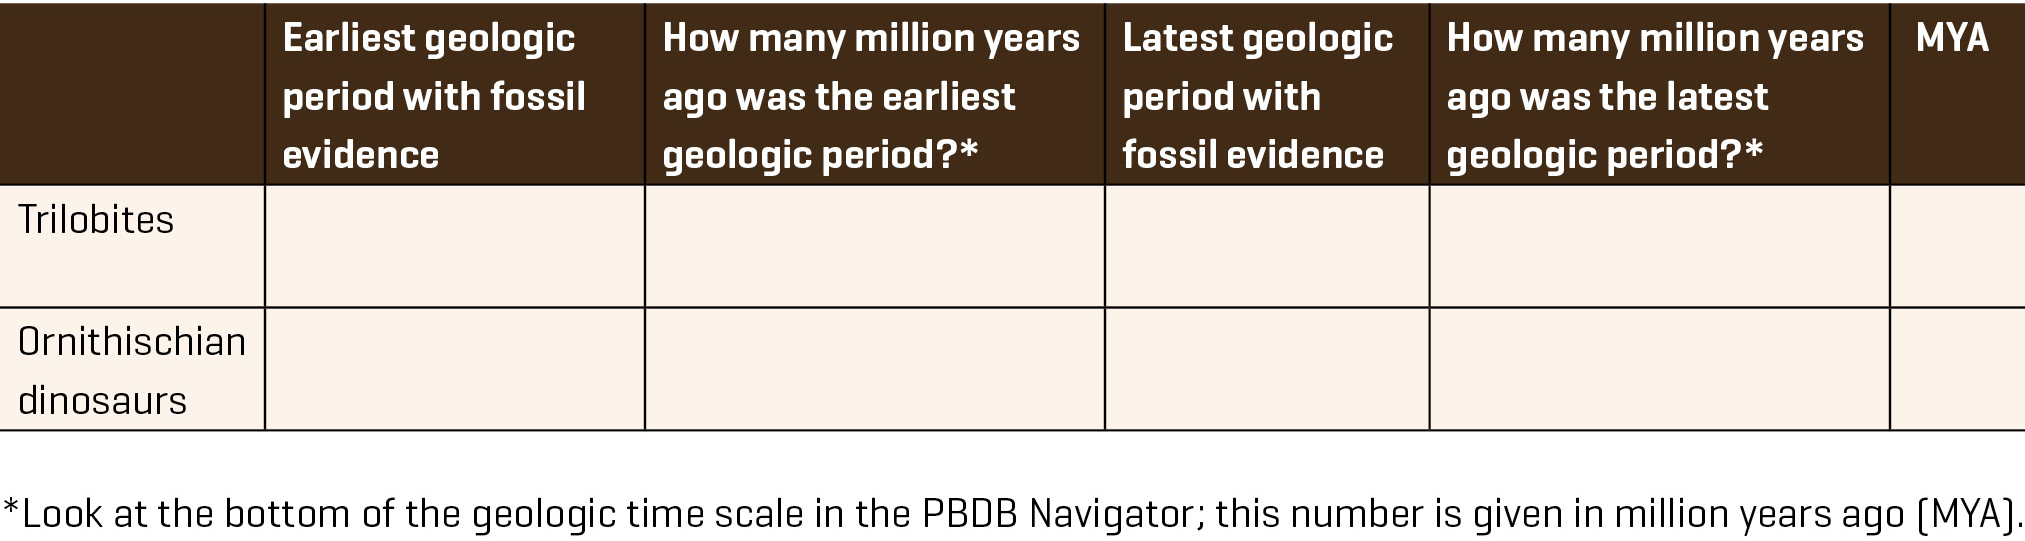 Student data table for determining earliest and latest geologic periods with evidence of Ornithischia dinosaurs and trilobites. Modified from the Life through Time lesson linked on the PBDB (George 2017).